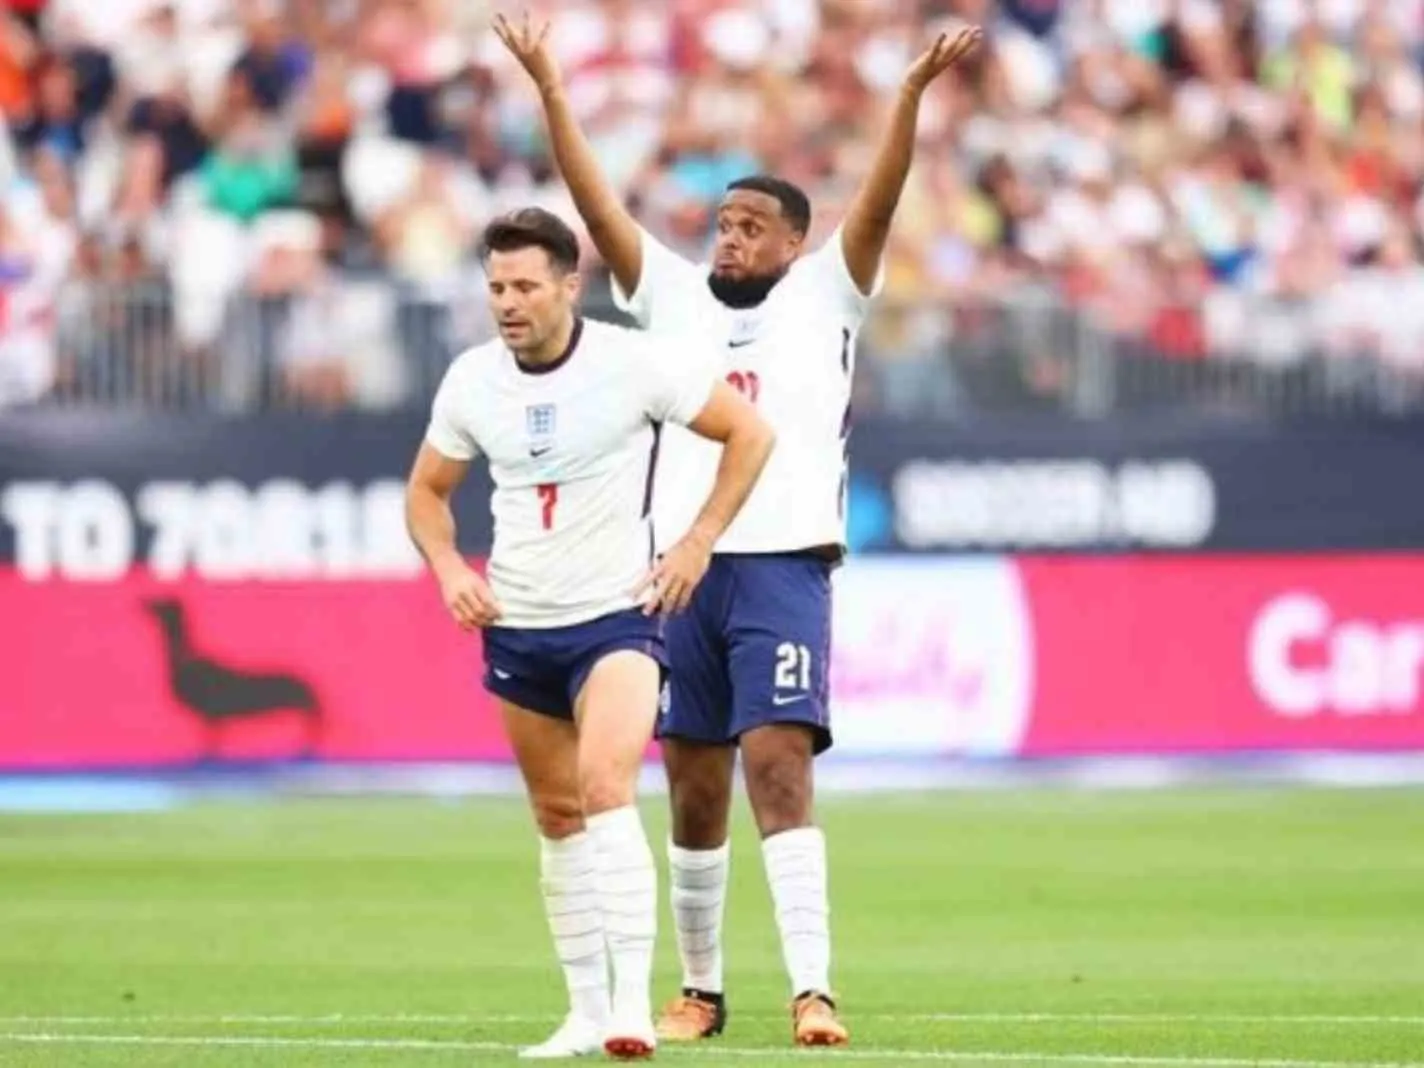 Chunkz (at the back) throws hands up in despair as Mark Wright prepares to take a penalty at Soccer Aid 2022.